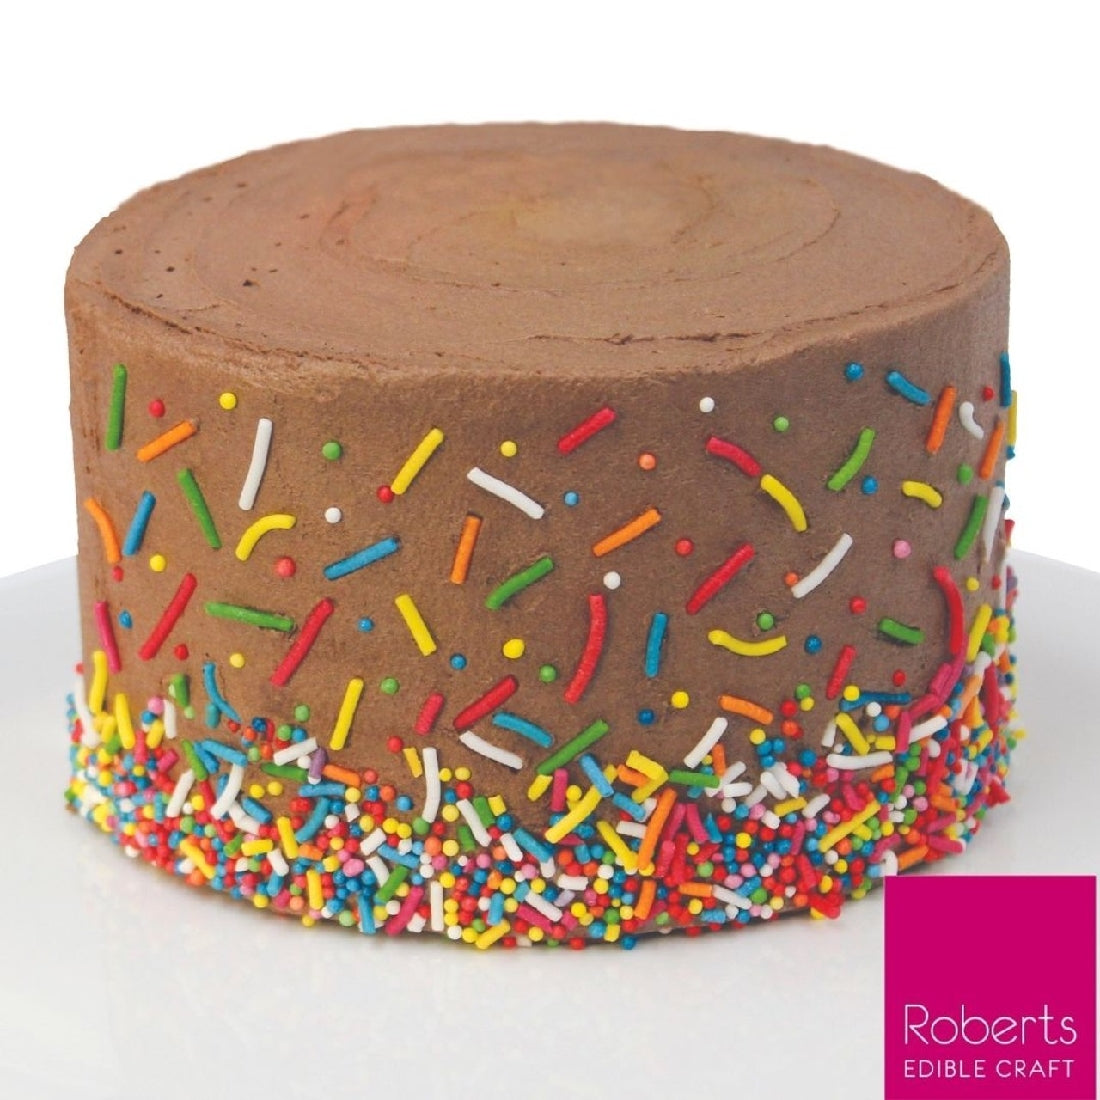 Roberts Edible Craft Chocolate Cake Kit - Sprinkles Included